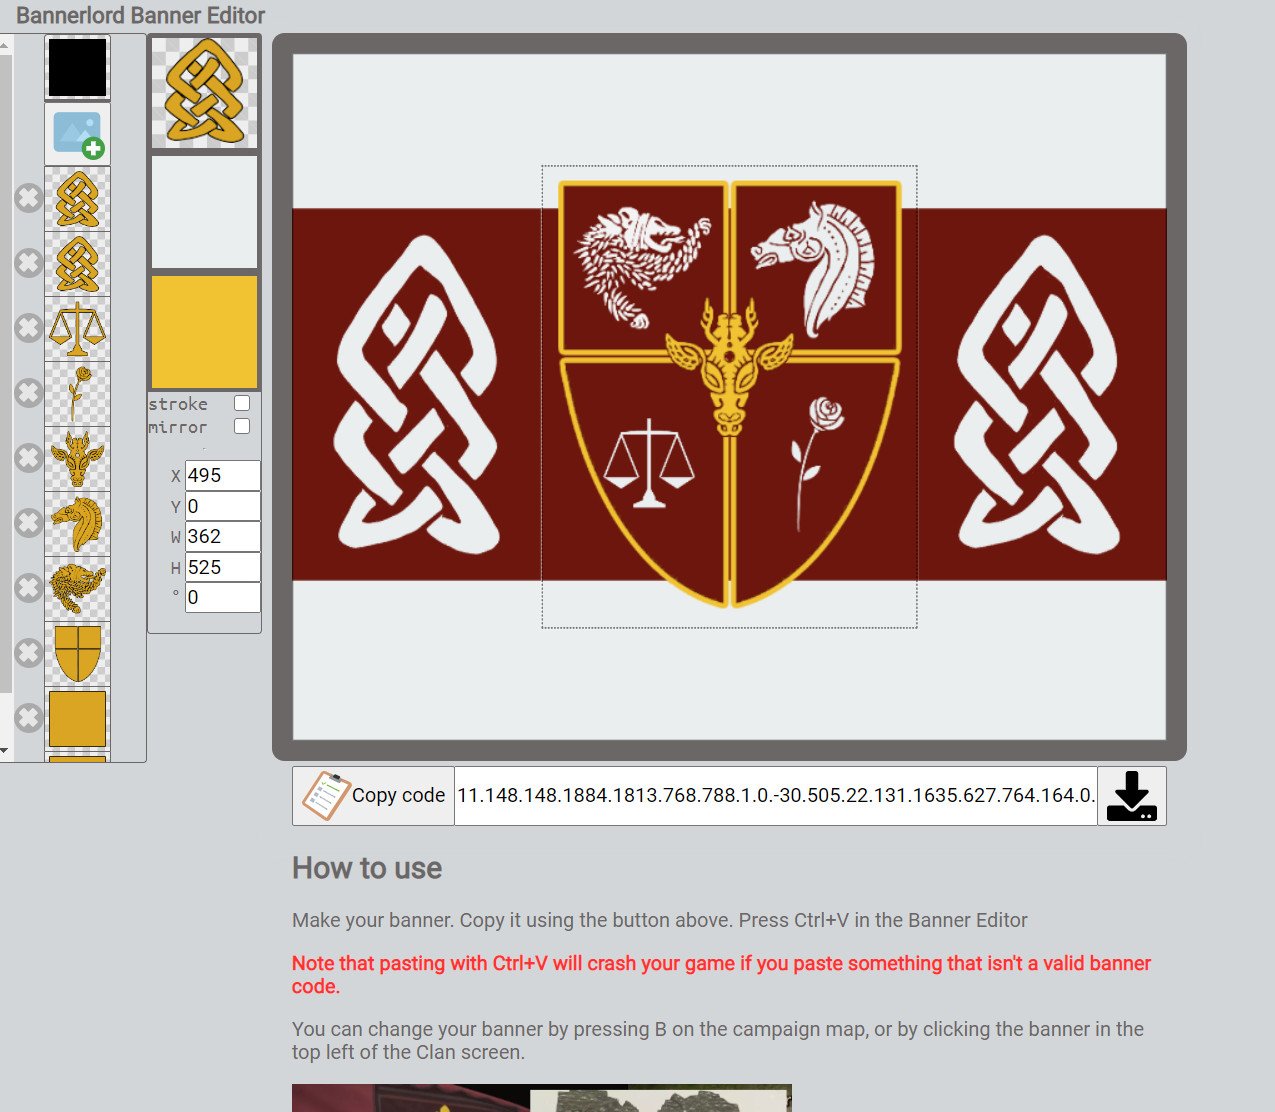 How To Create Your Own Custom Banner In Mount Blade Ii